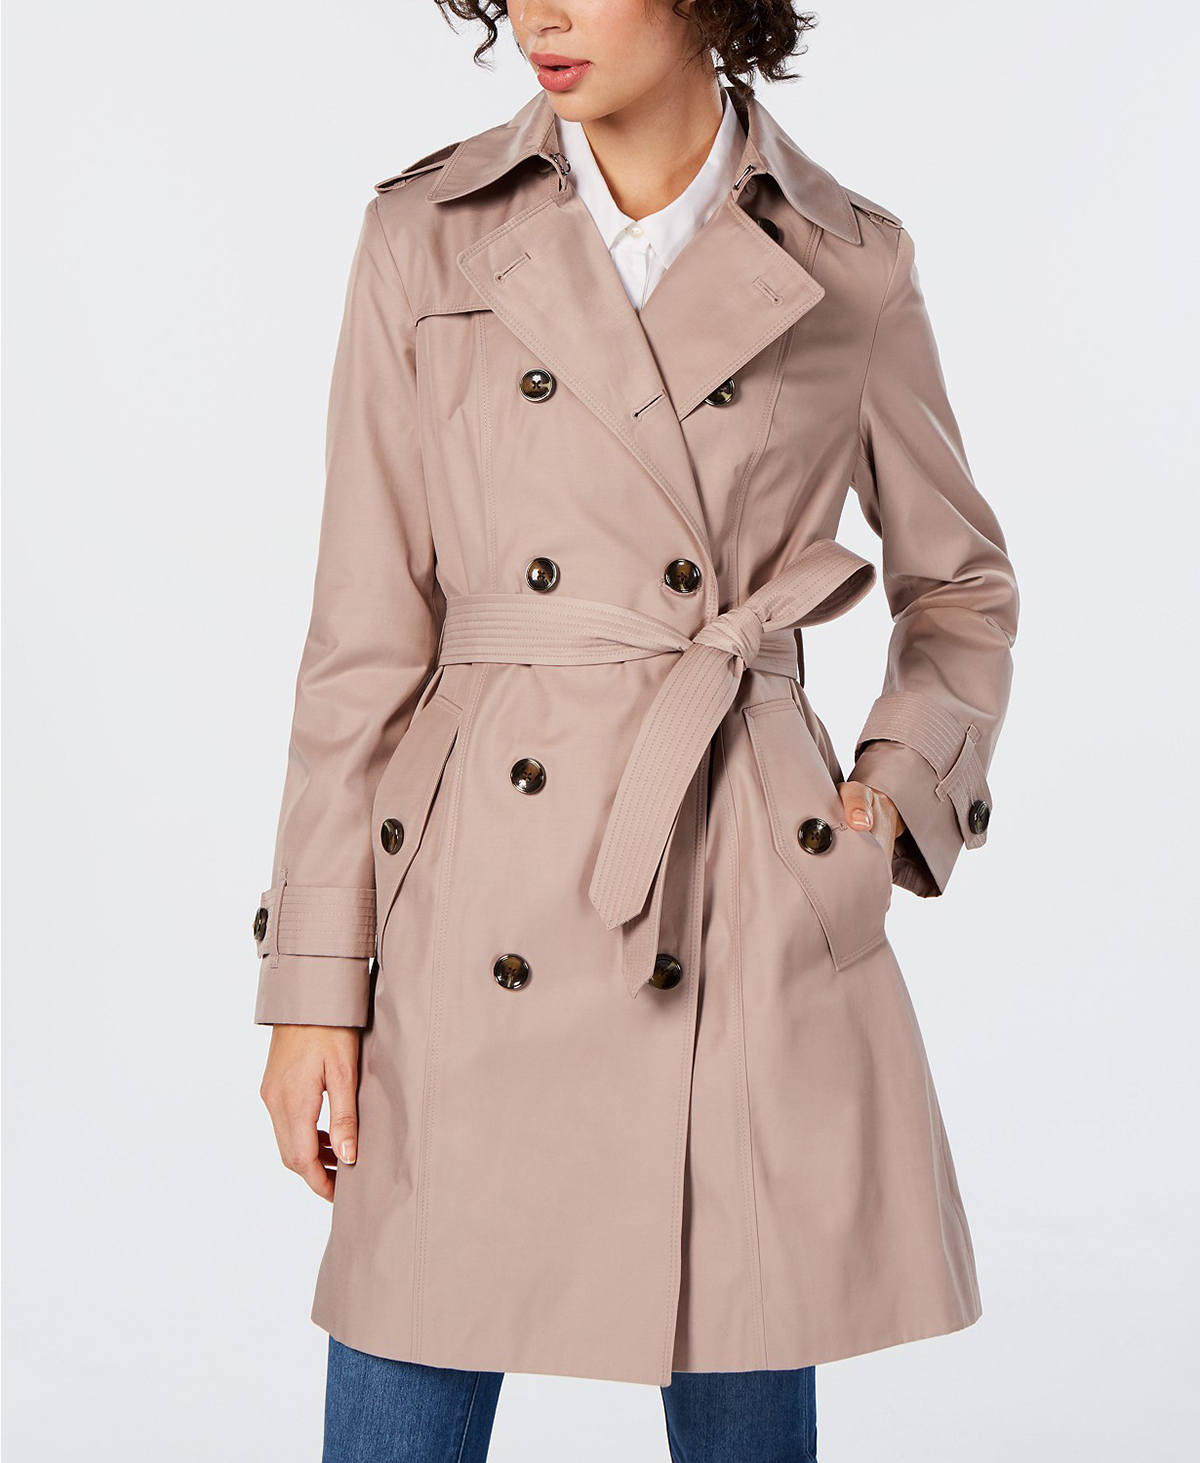 This Water-Resistant Trench Coat Is Super Adorable – And 40% Off!